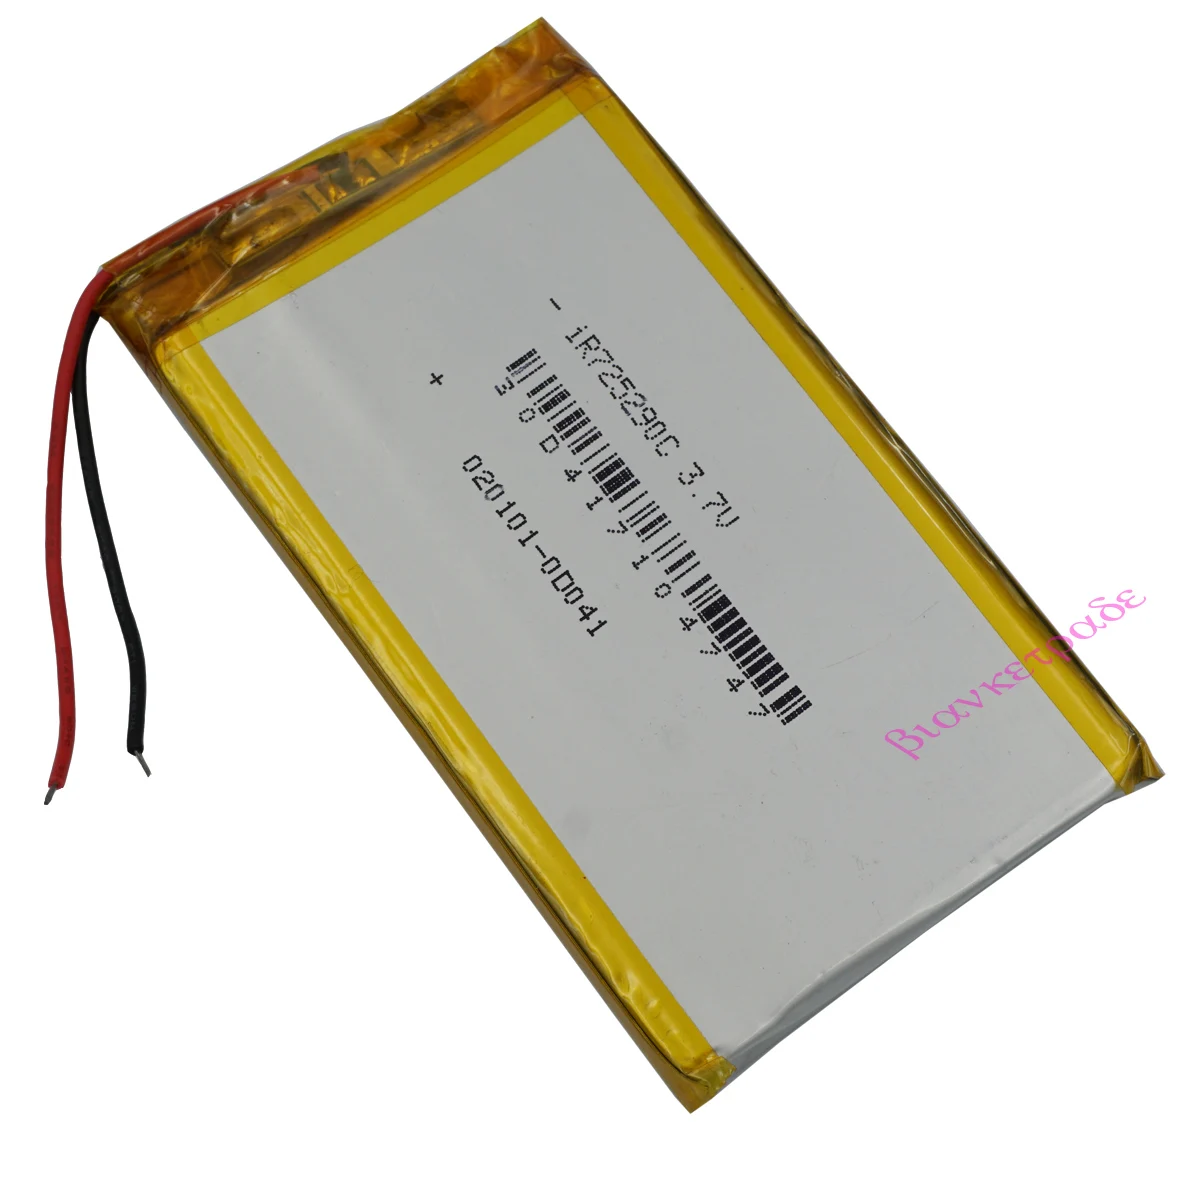 

3.7V 4000 mAh 14.8Wh 725290 Rechargeable Polymer Lipo Li Battery For PSP GPS Portable TV Video Player Plate PDA MID Tablet PC